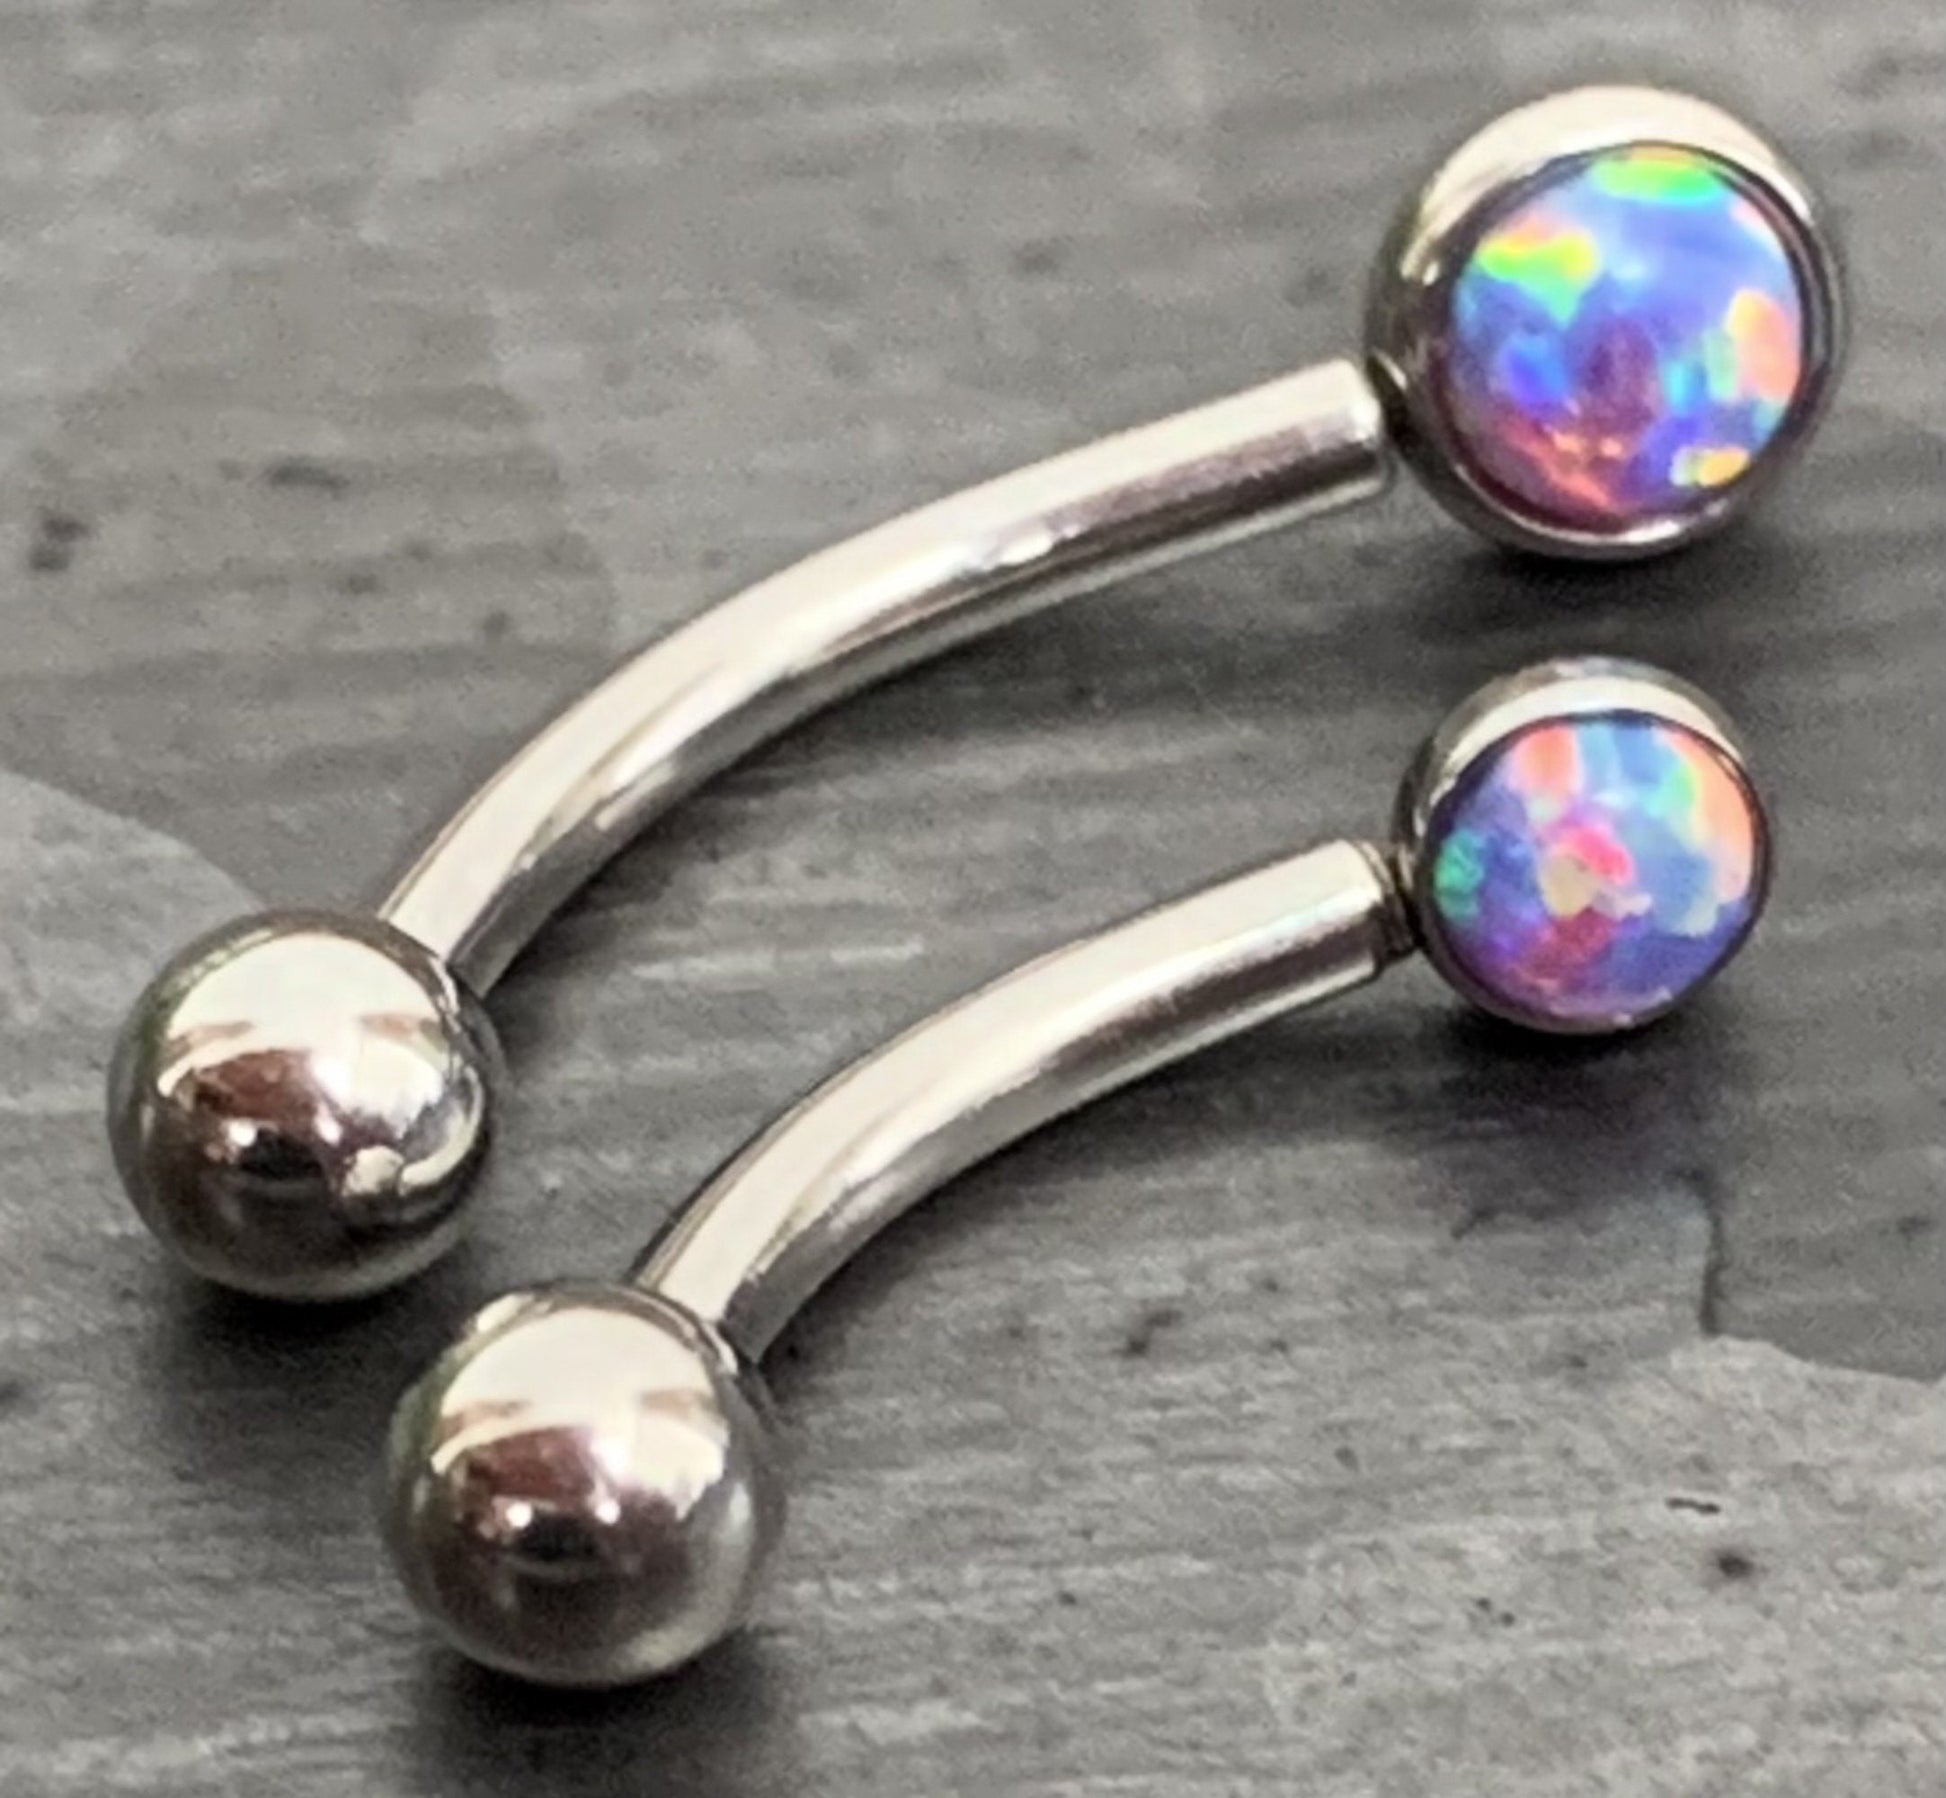 1 Piece Stunning Flat Back Set 3mm Opal Curved Barbell Eyebrow Ring - 16g - Blue, Purple, White, Gold, Rose Gold and Multi-Color Available!